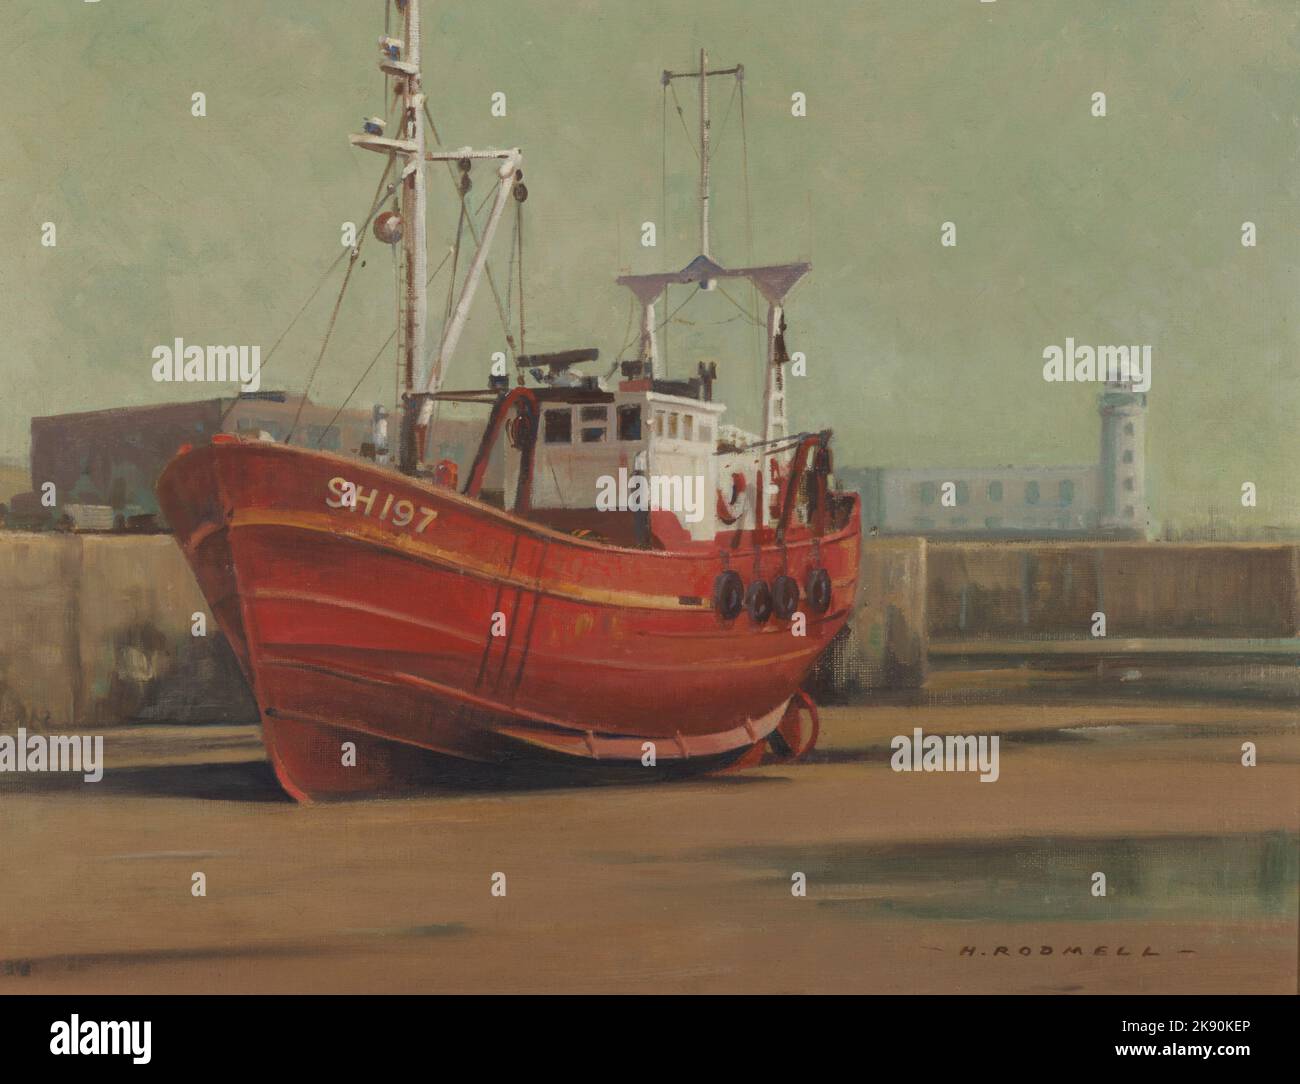 Scarborough Fishing boat SH197, oil painting of a trawler/dredger fishing boat in South Bay harbour by local artist Herbert Rodmell (1913-1994), which Stock Photo